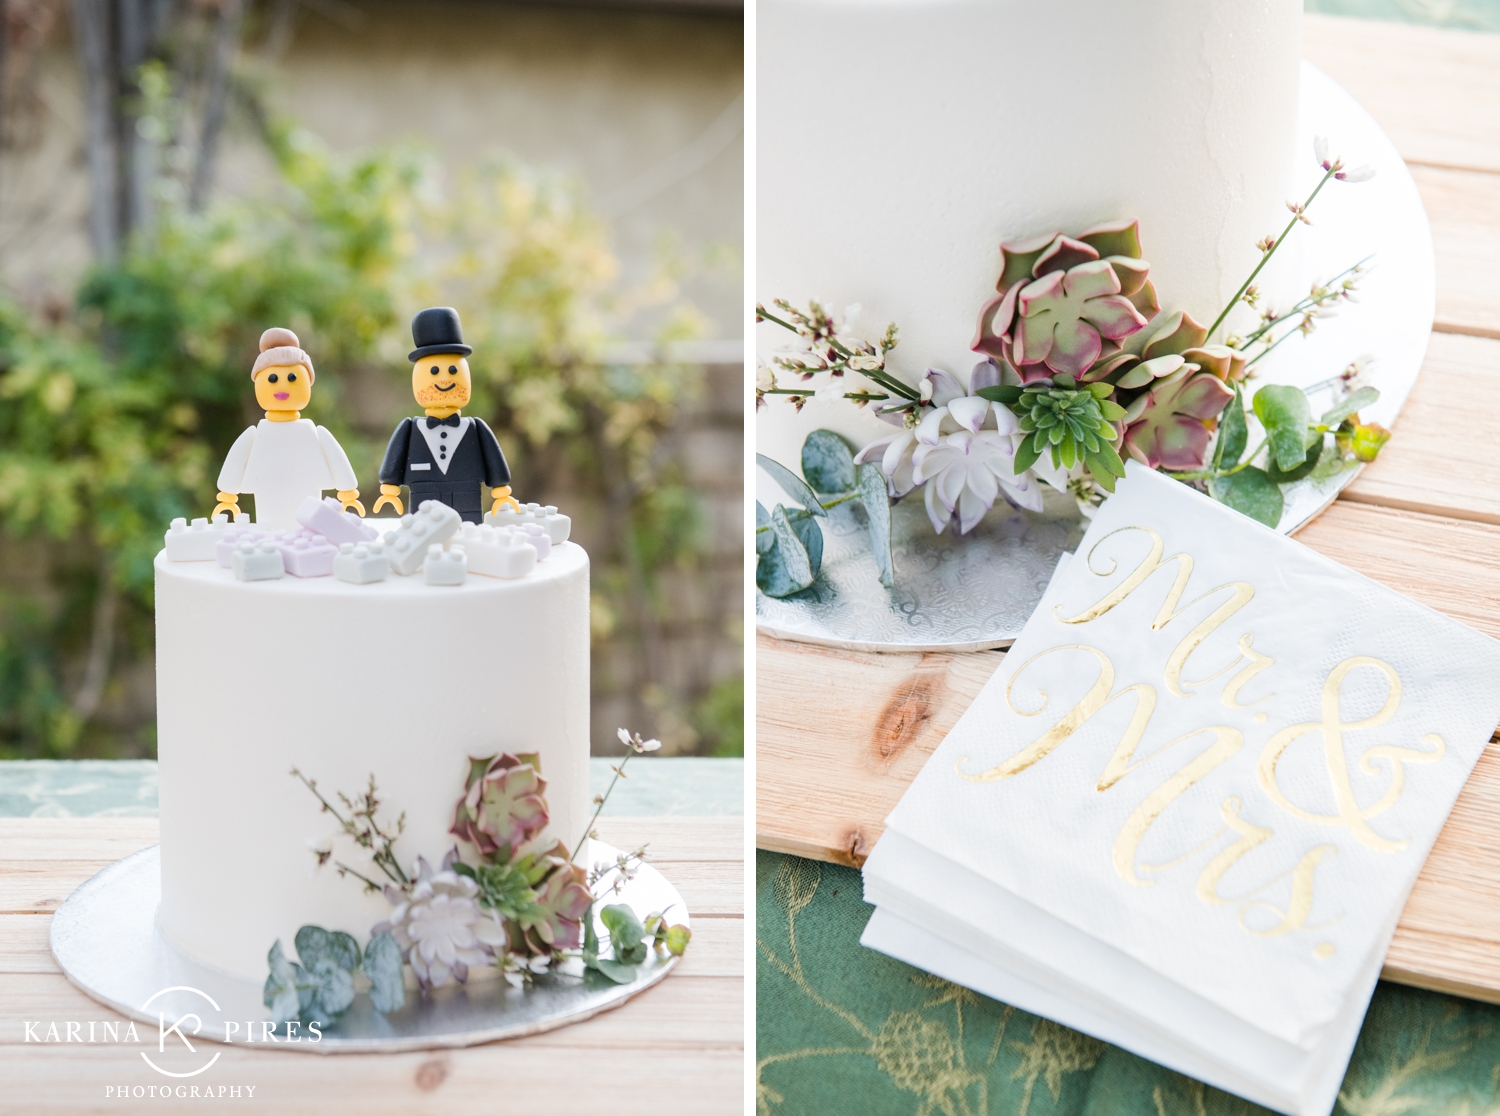 Lego cake toppers